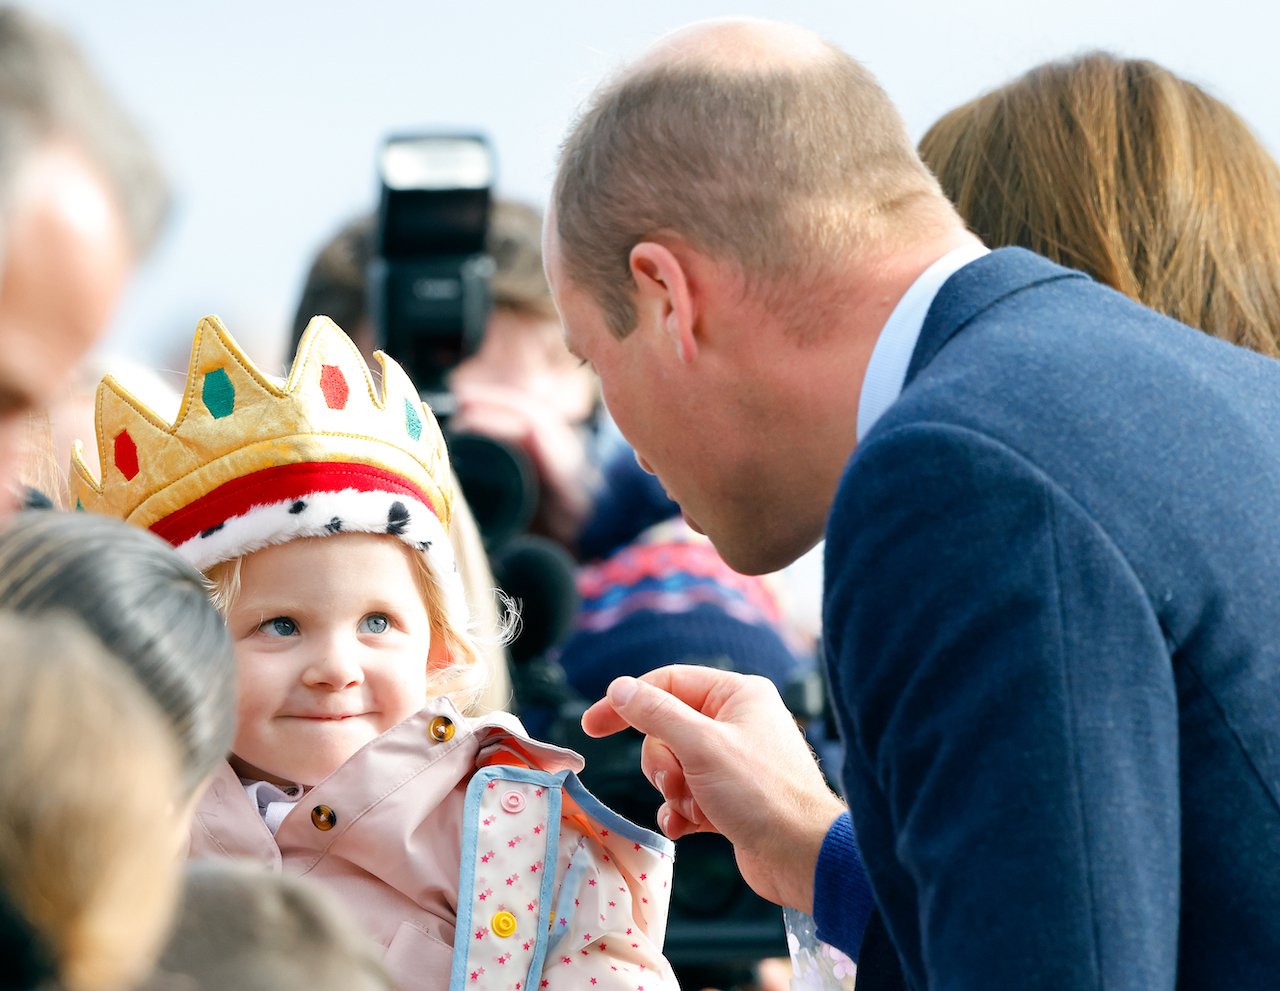 Prince William, Prince of Wales meets a young, crown-wearing, member of the public during a walkabout on October 6, 2022.